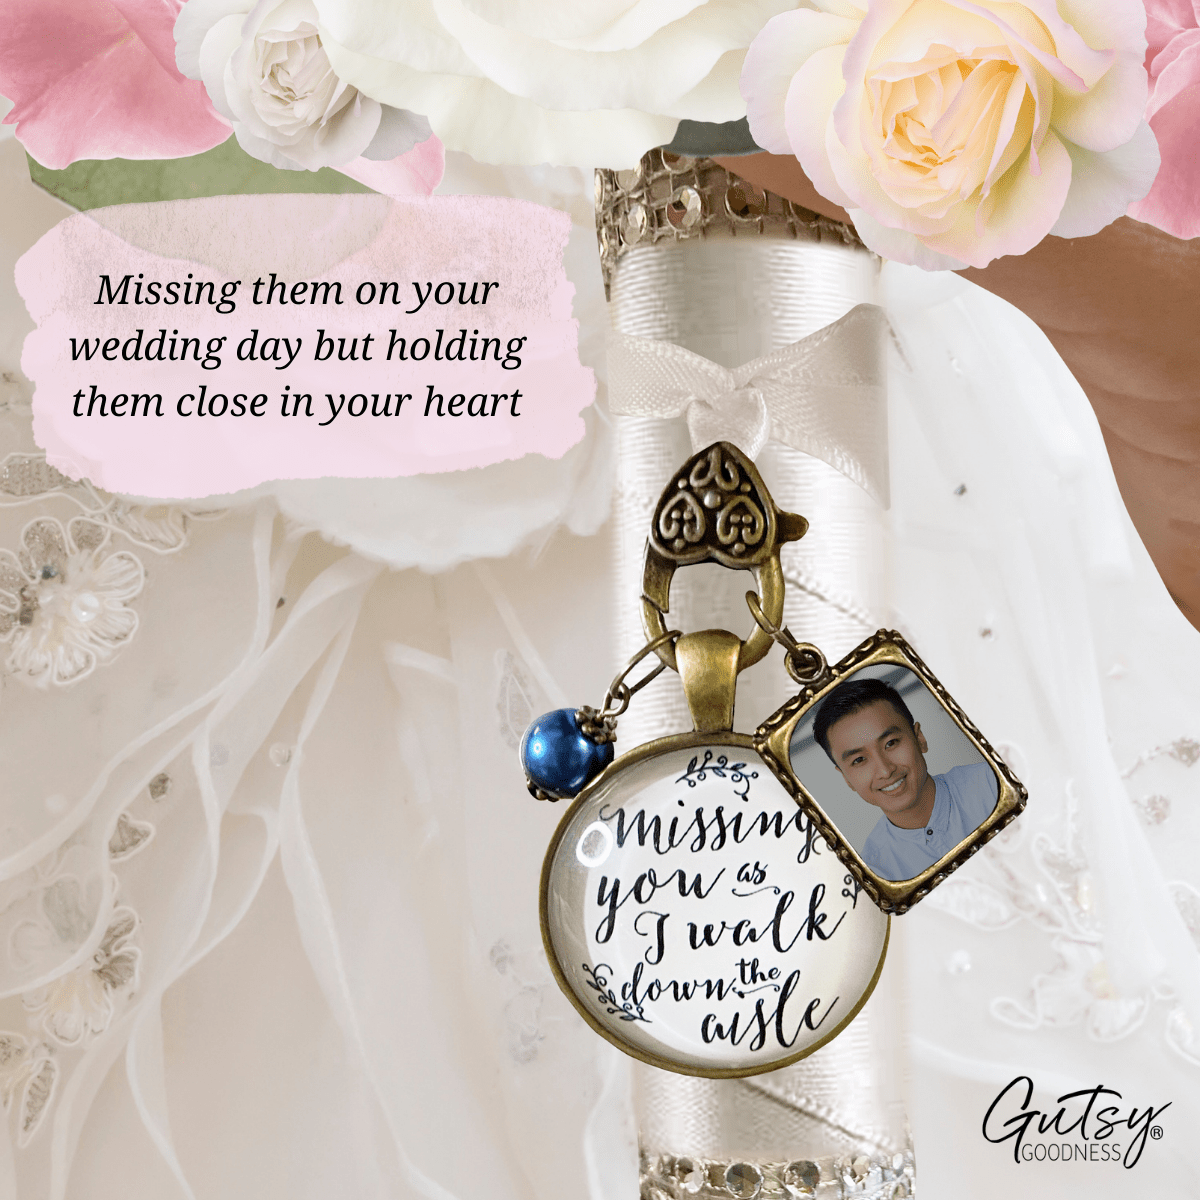 Bouquet Charm Missing You Wedding Memorial Jewelry Bridal Photo Frame Blue Bead - Gutsy Goodness Handmade Jewelry Gifts